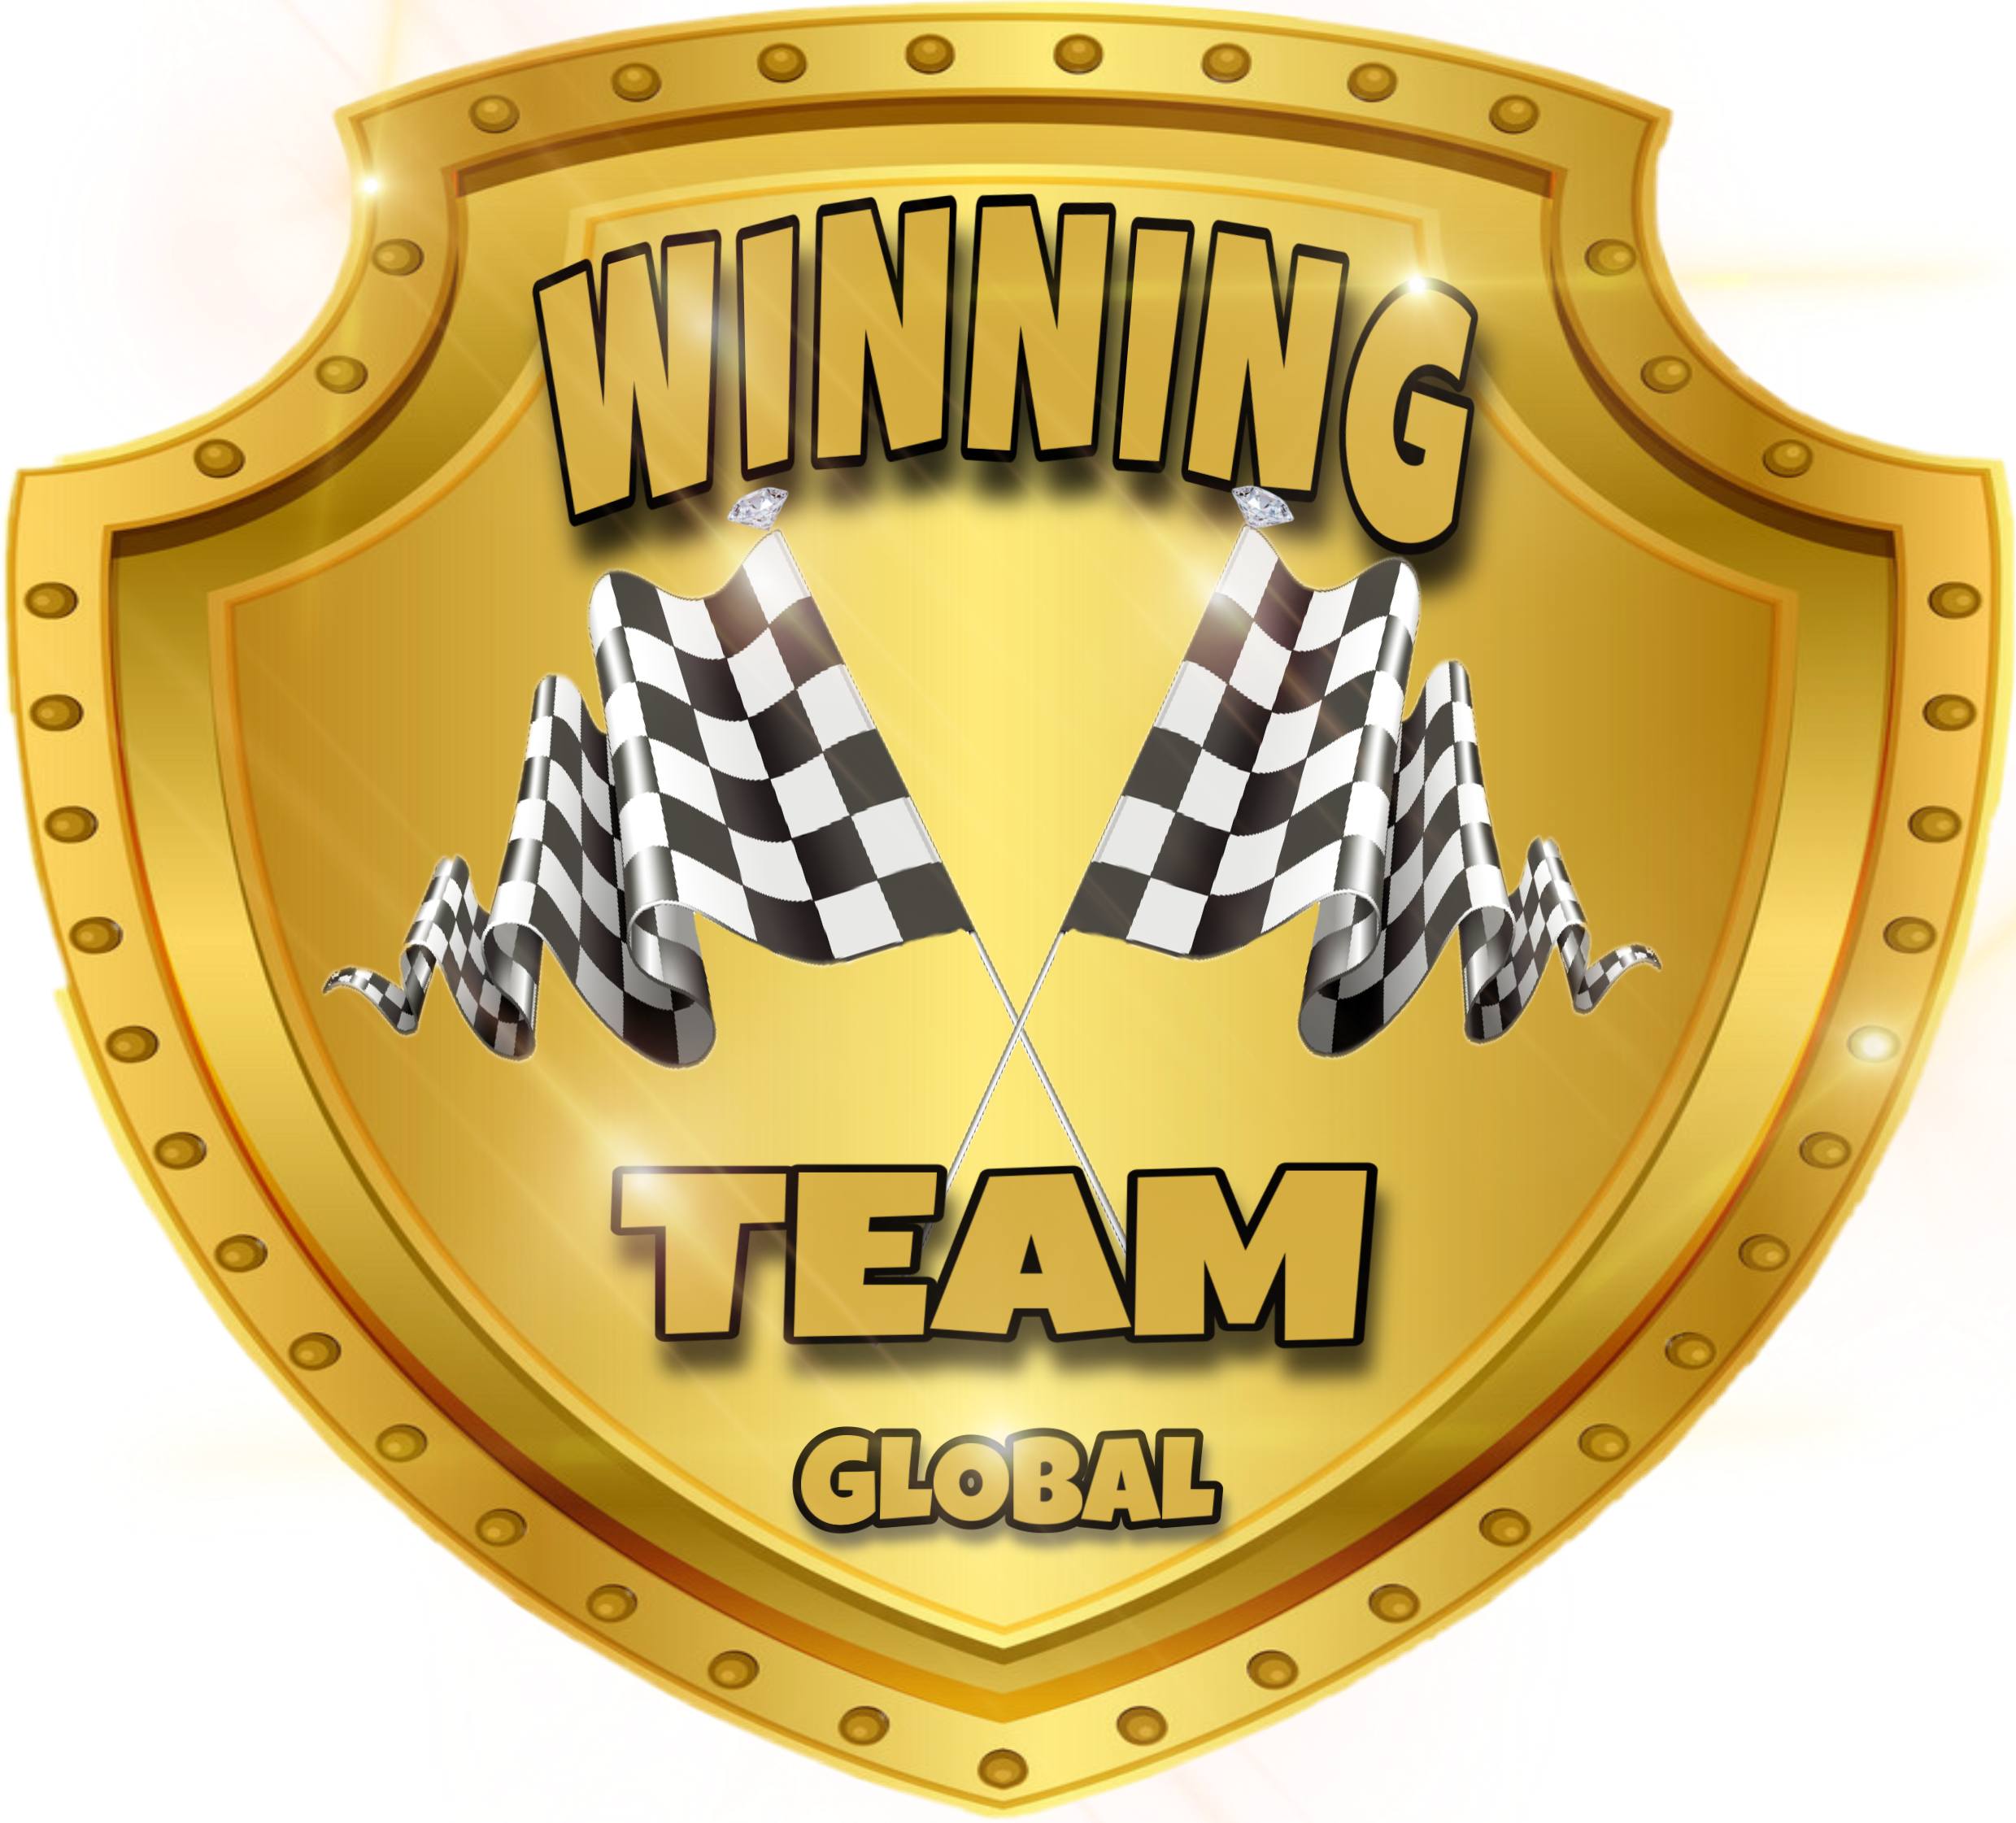 #WINNINGTEAMGLOBALGEAR WINNING TEAM GLOBAL GEAR IS A COLLECTION OF OUR PERSONAL BRANDS CREATED. COMPANY CREATED IN 1991. SO MANY BRANDS UNDER THIS LABEL. ENJOY THE STYLISH AND TRENDY LOOKS OF FASHION HERE IN WINNING TEAM'S FASHION DIVISION